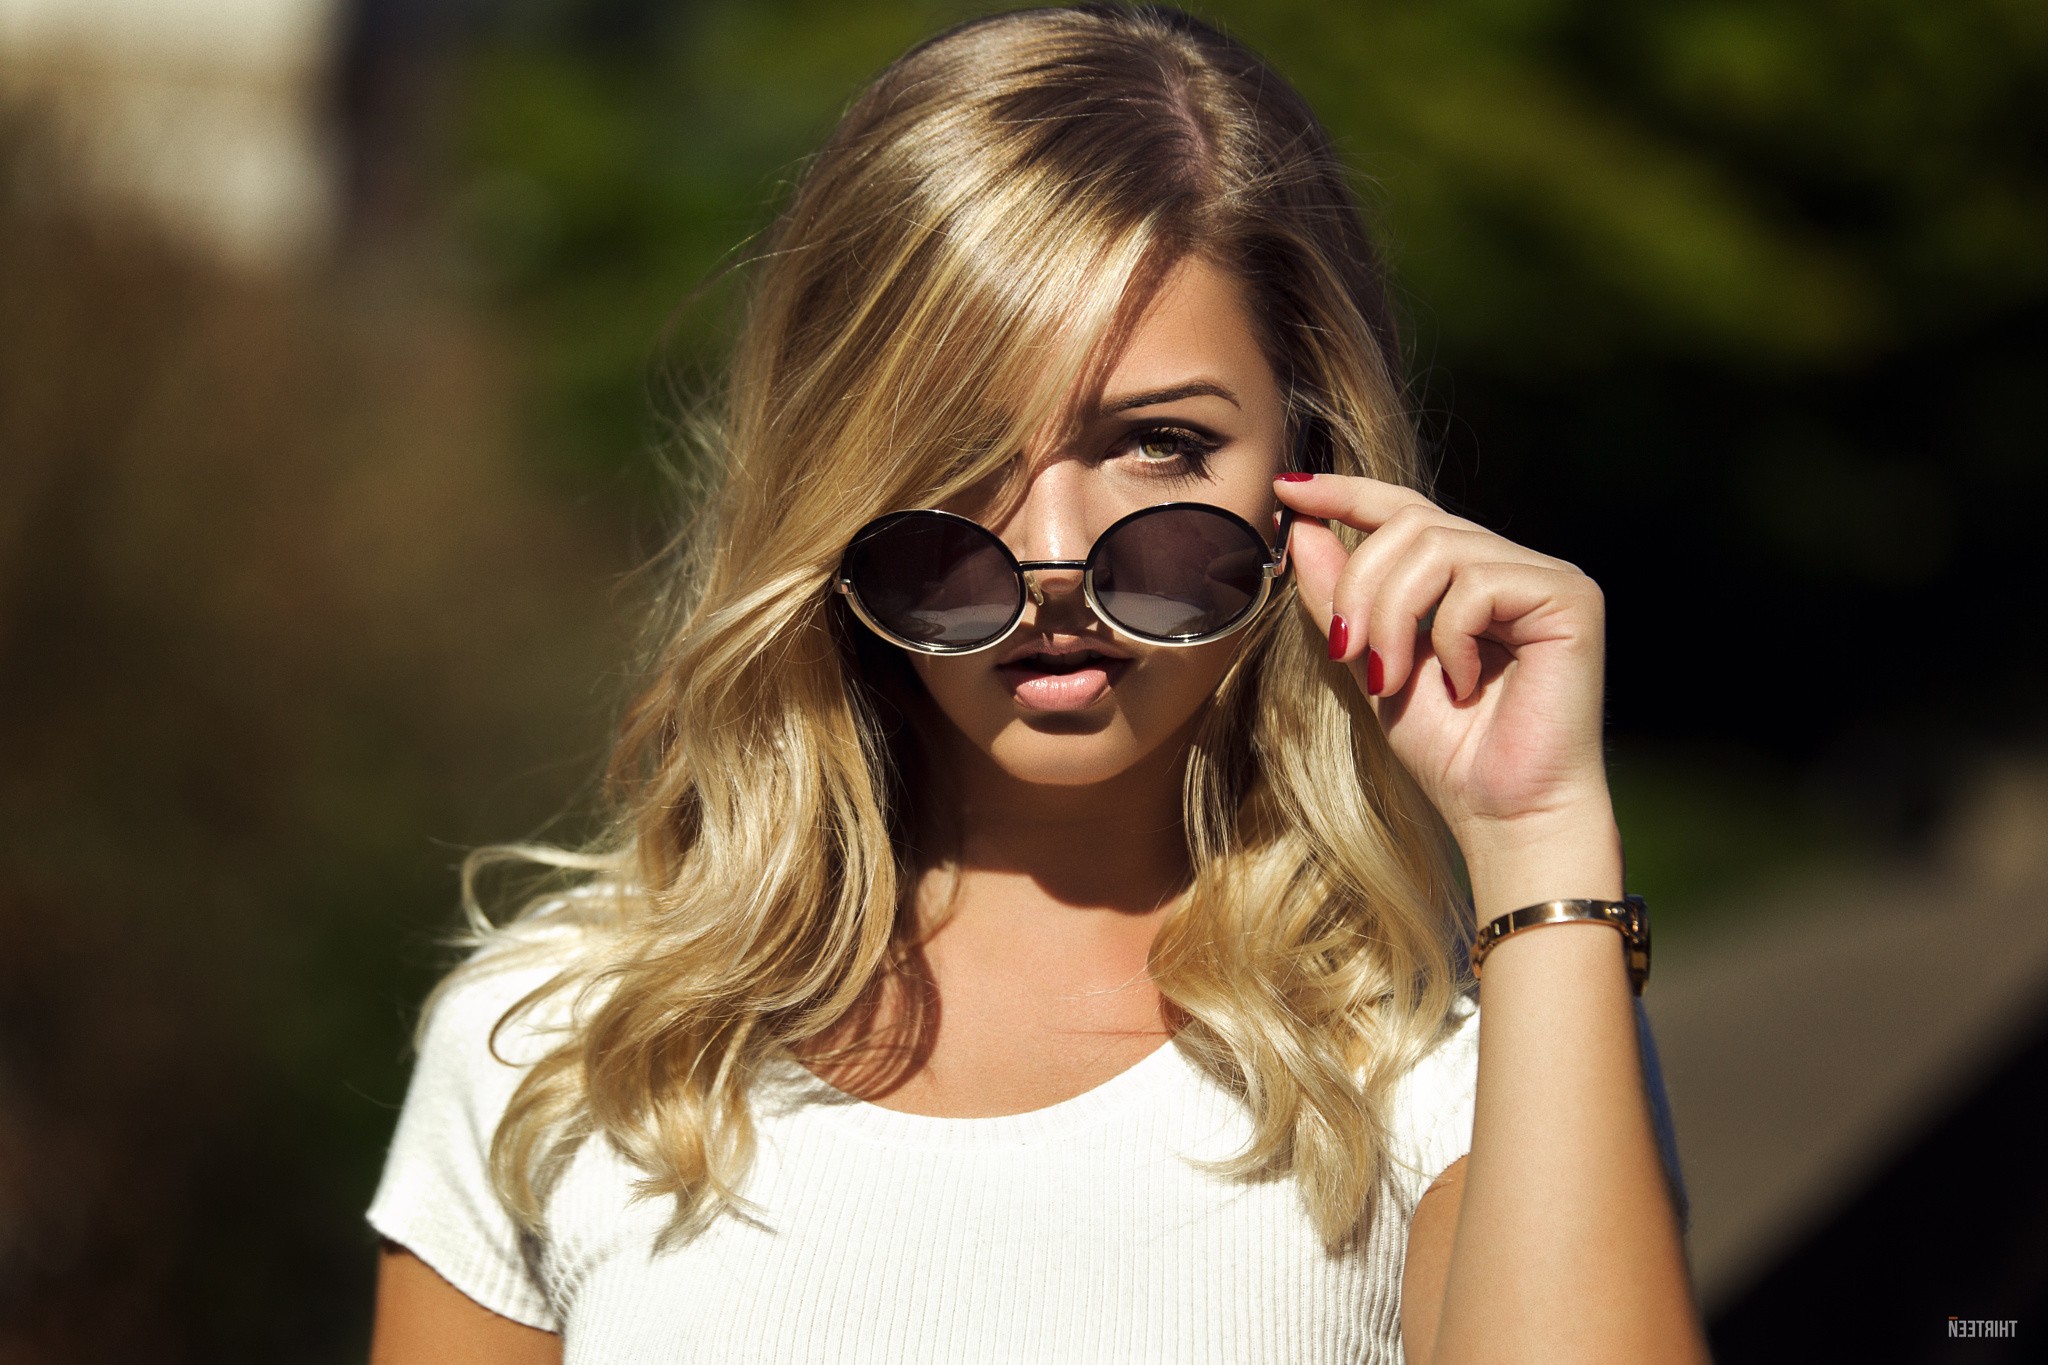 Women Face Blonde Women With Glasses Sunglasses Depth Of Field Red Nails Portrait Touching Glasses L 2048x1365